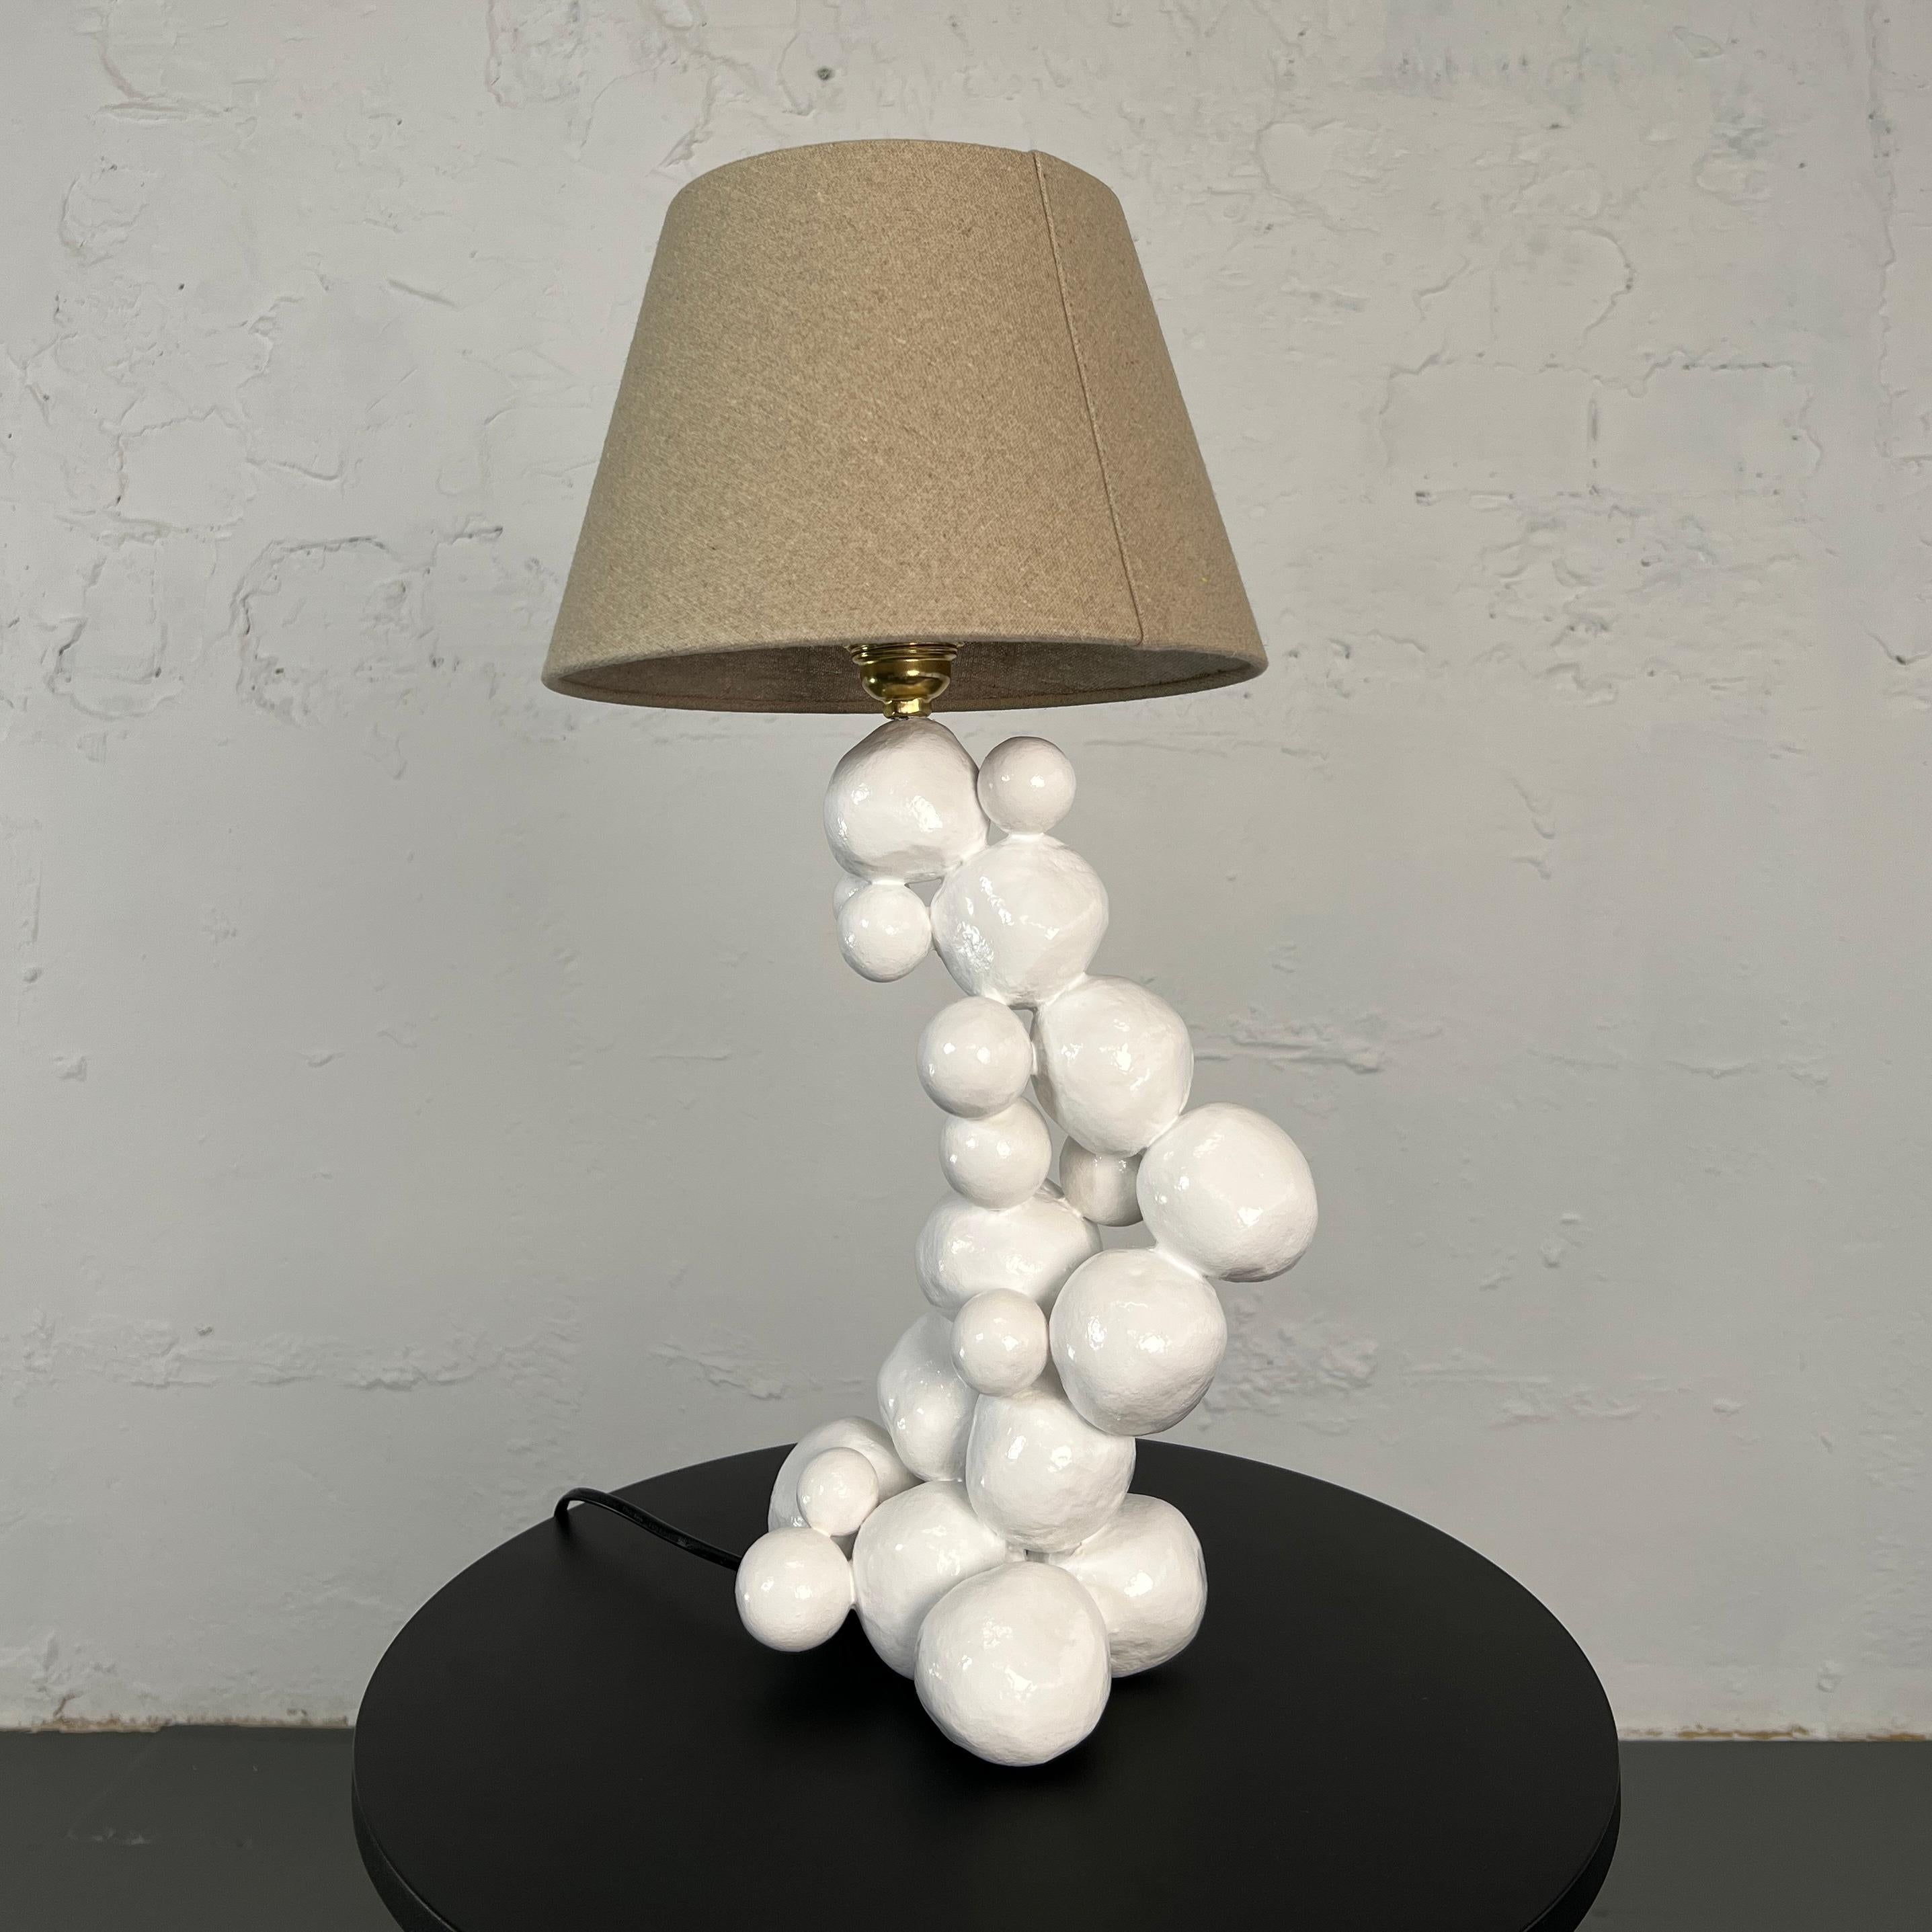 Made in Spain, 2023.

White. Minimalistic. Abstract. Spheres: from molecules to planets. Look around: mono sphere or billions of small combinations of spheres - this all is our world.

Location and Delivery from Spain

Authors: Created by Ros